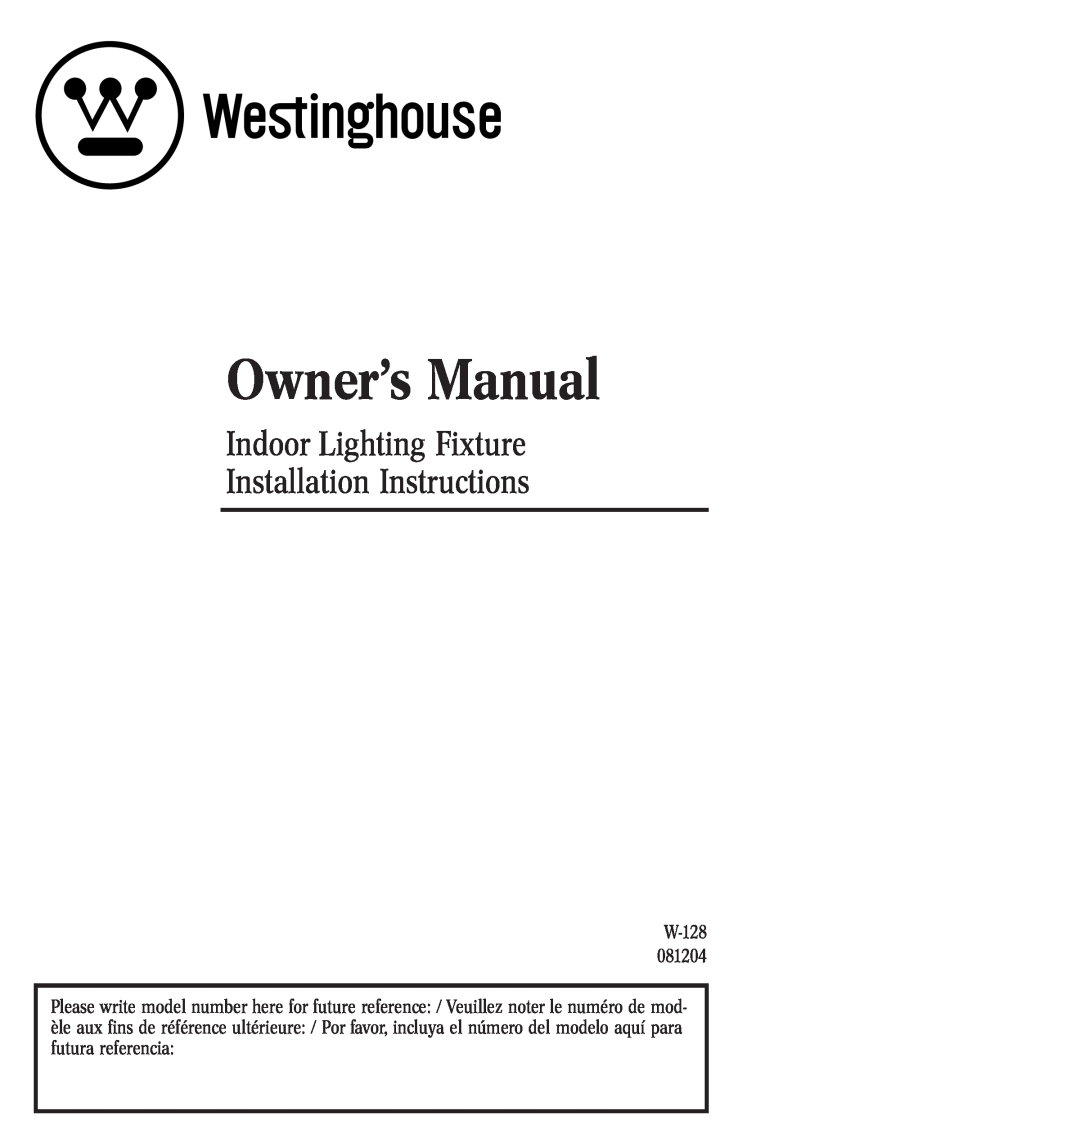 Westinghouse W-128 owner manual Indoor Lighting Fixture Installation Instructions 